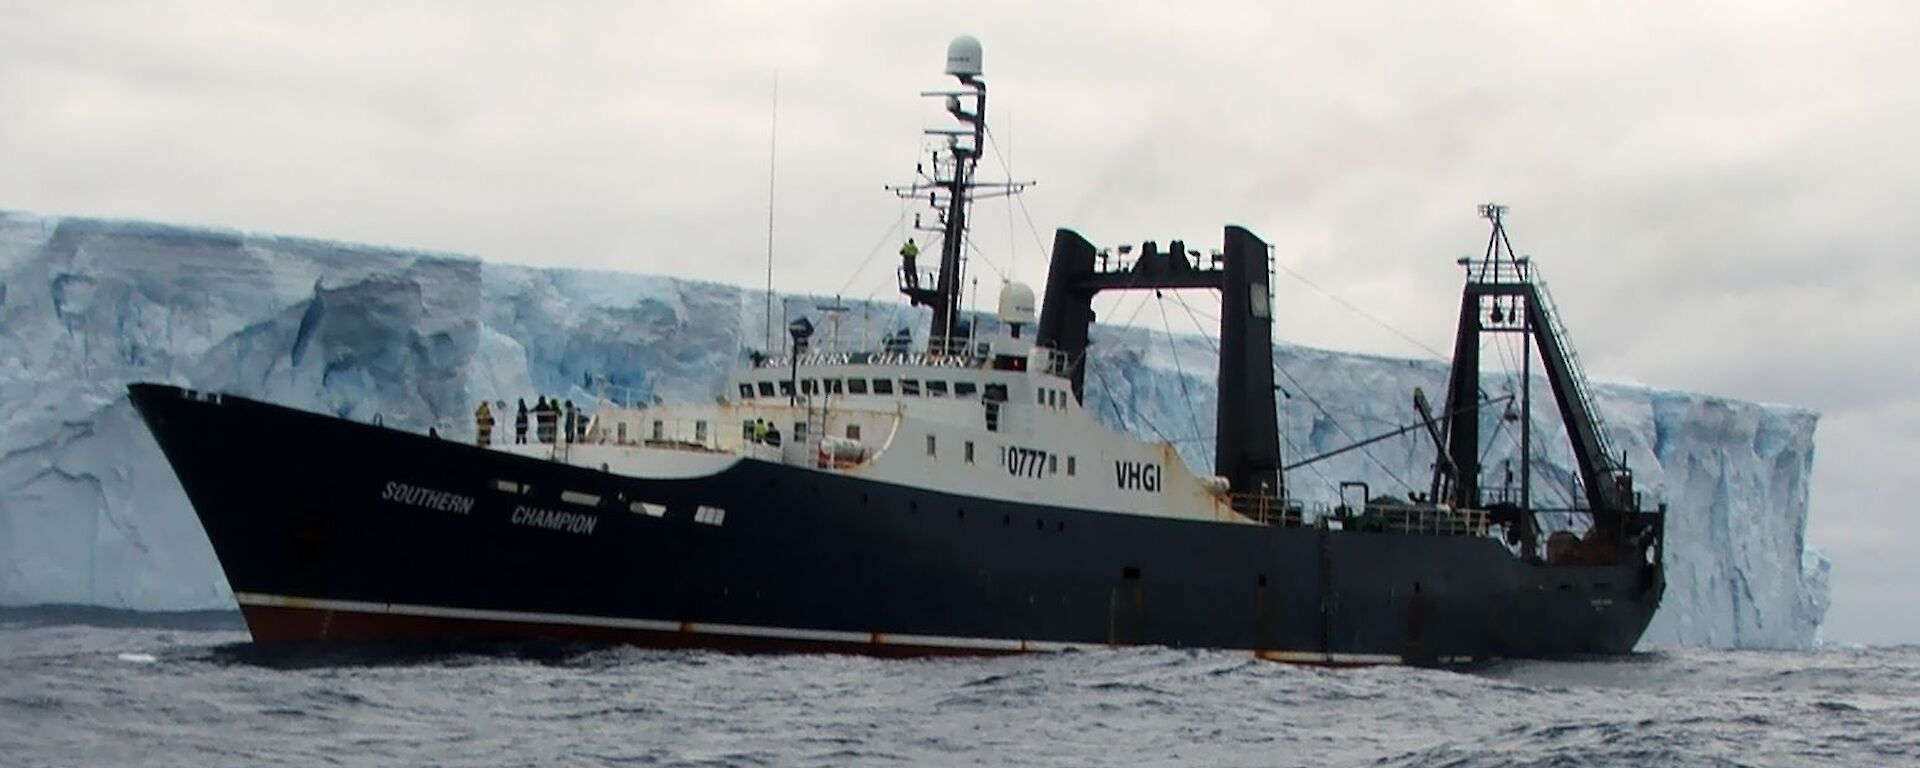 The Patagonian toothfish vessel, Southern Champion, alongside an iceberg in Antarctica.